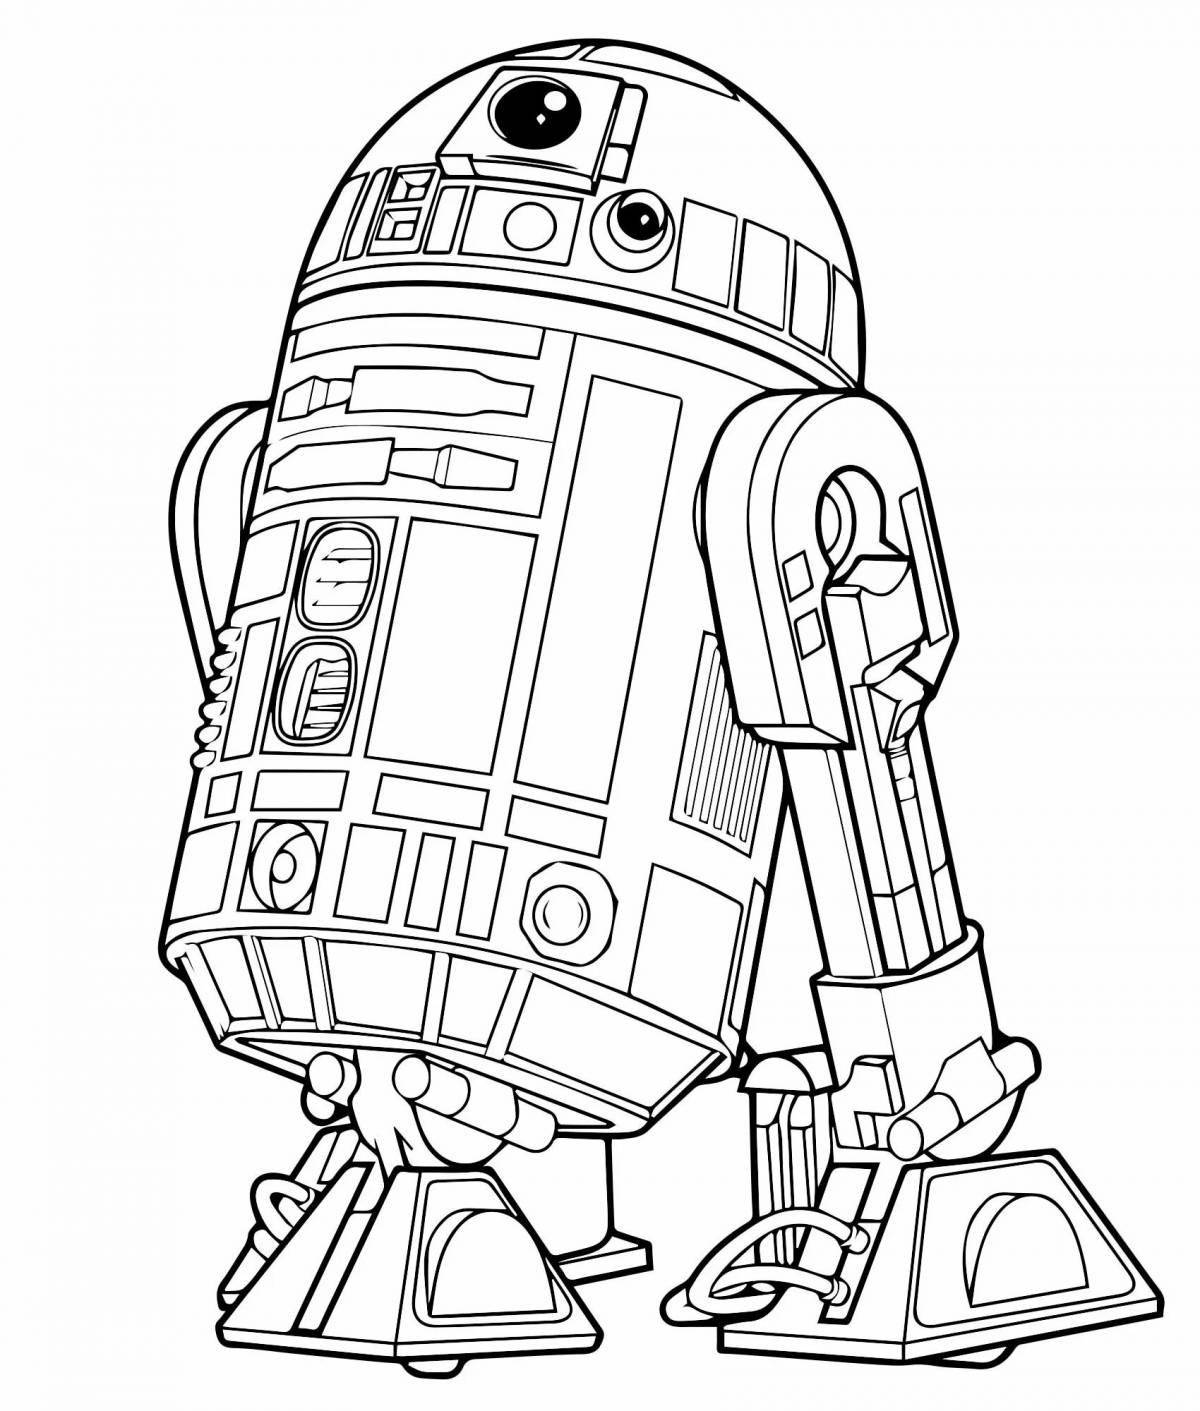 Awesome star wars coloring book for boys